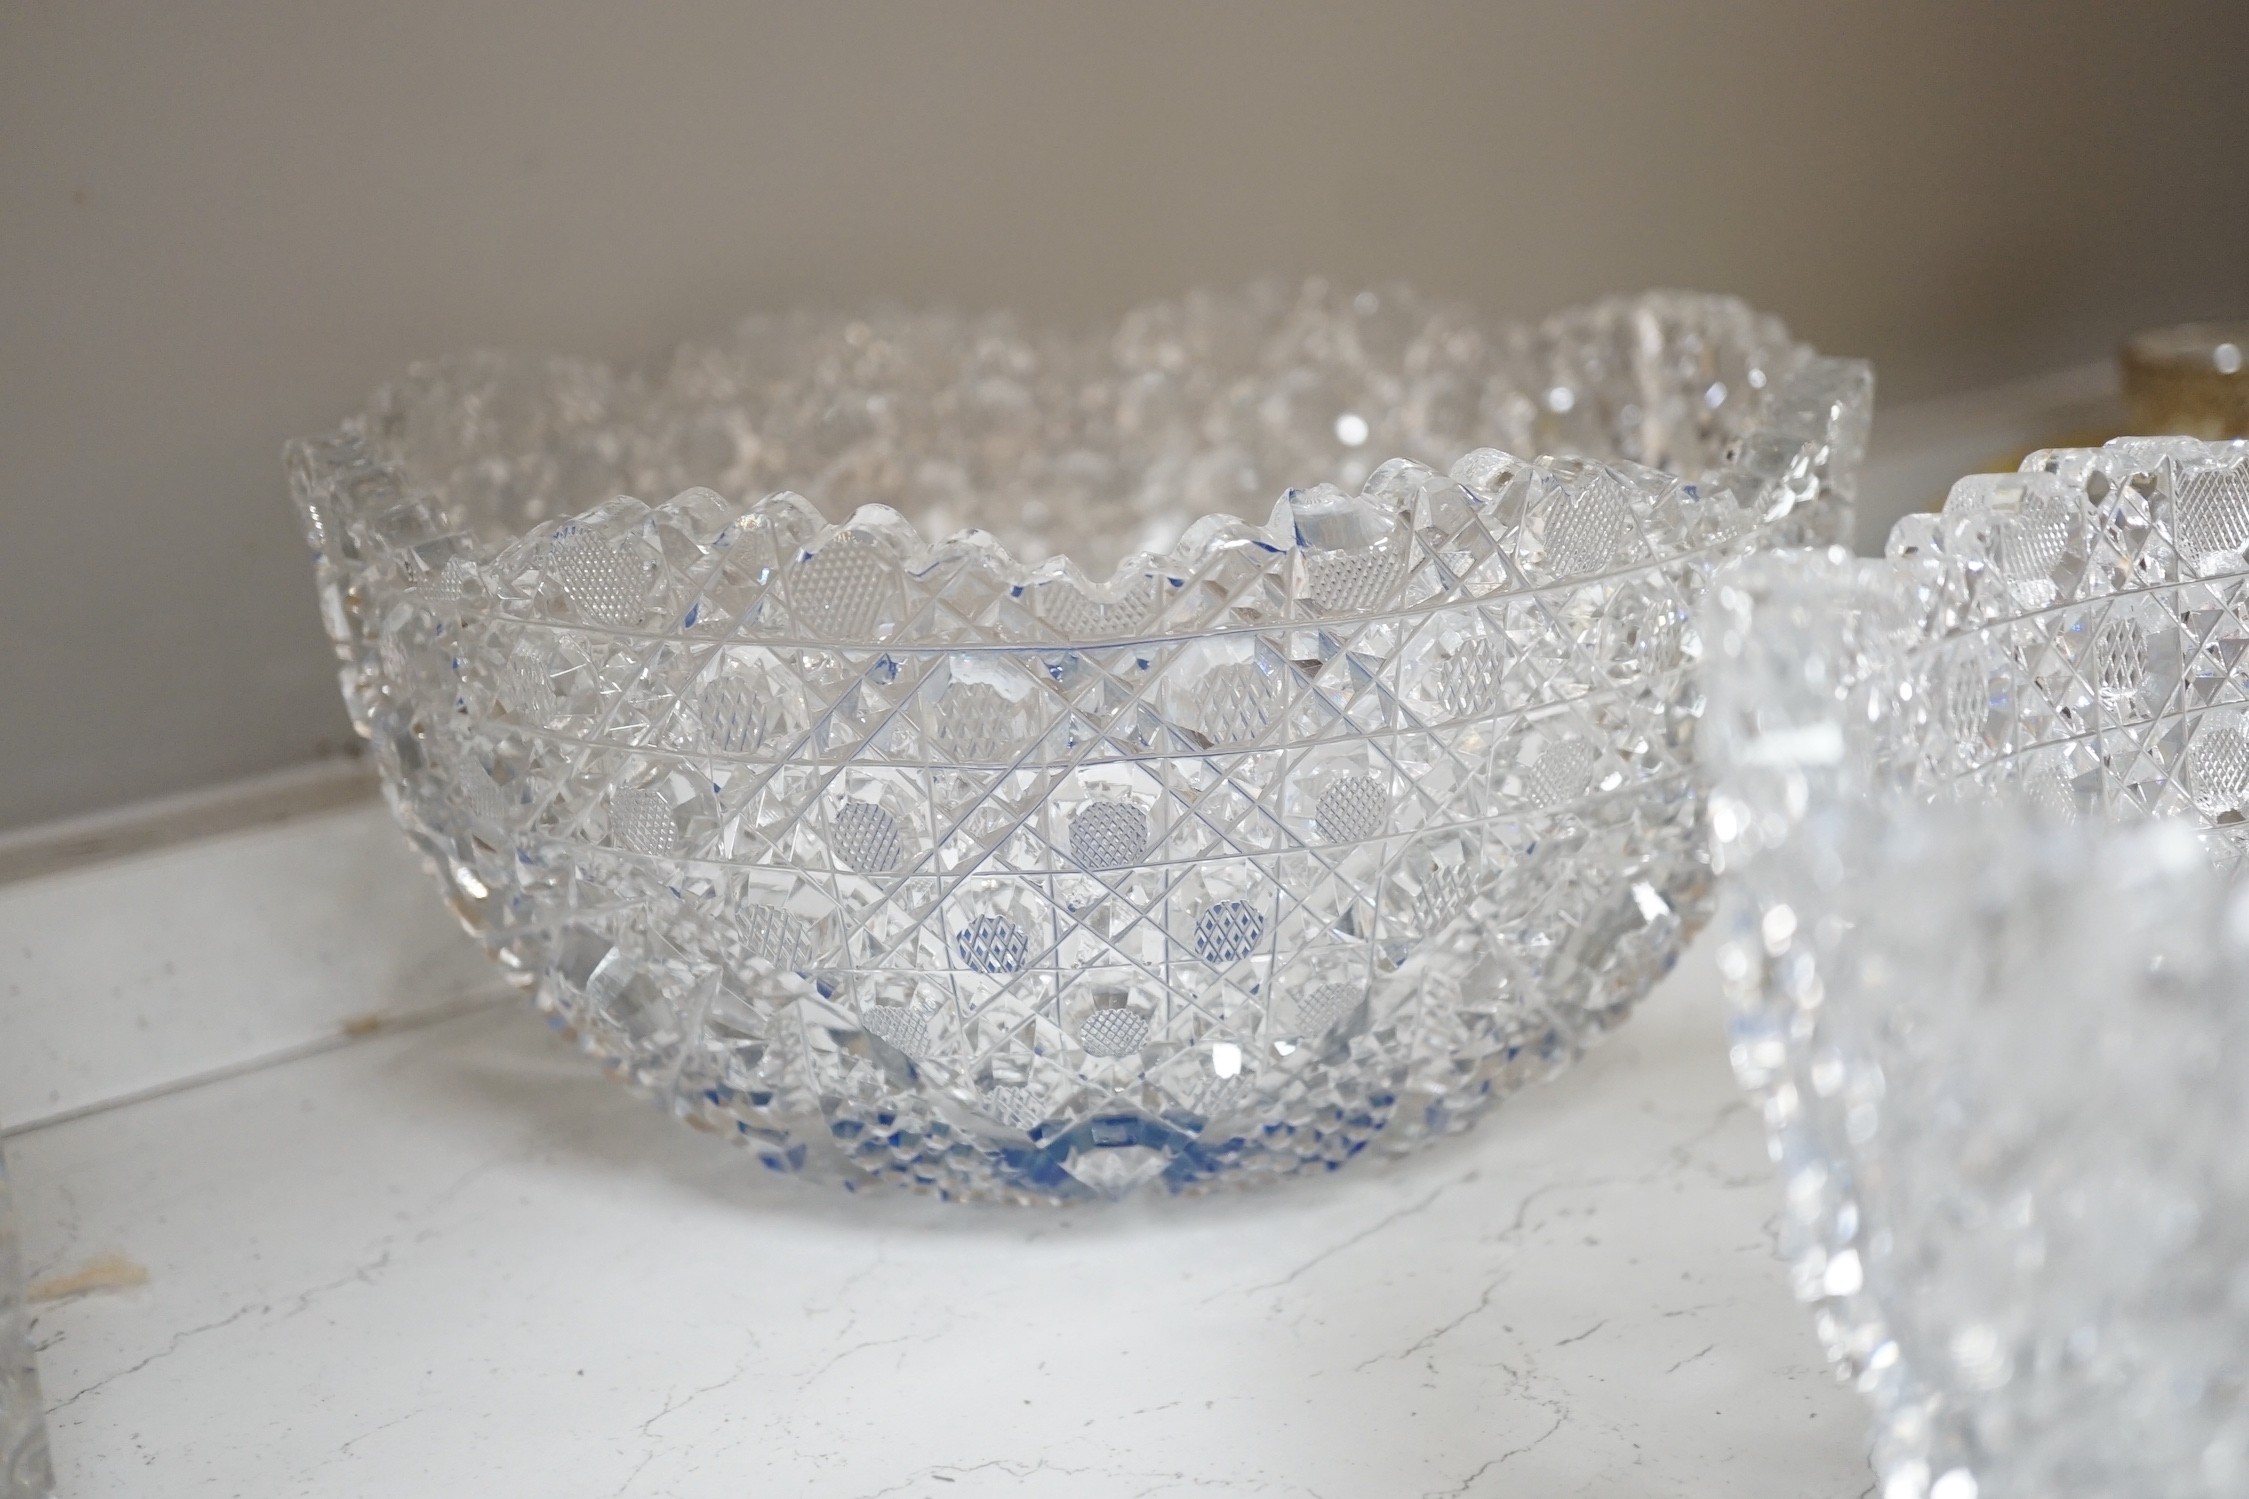 A Pair of Bohemian or Czech heavy cuts glass fruit bowls with blue flashed centres, 22.5 cm diameter, two decanters and six tumblers.